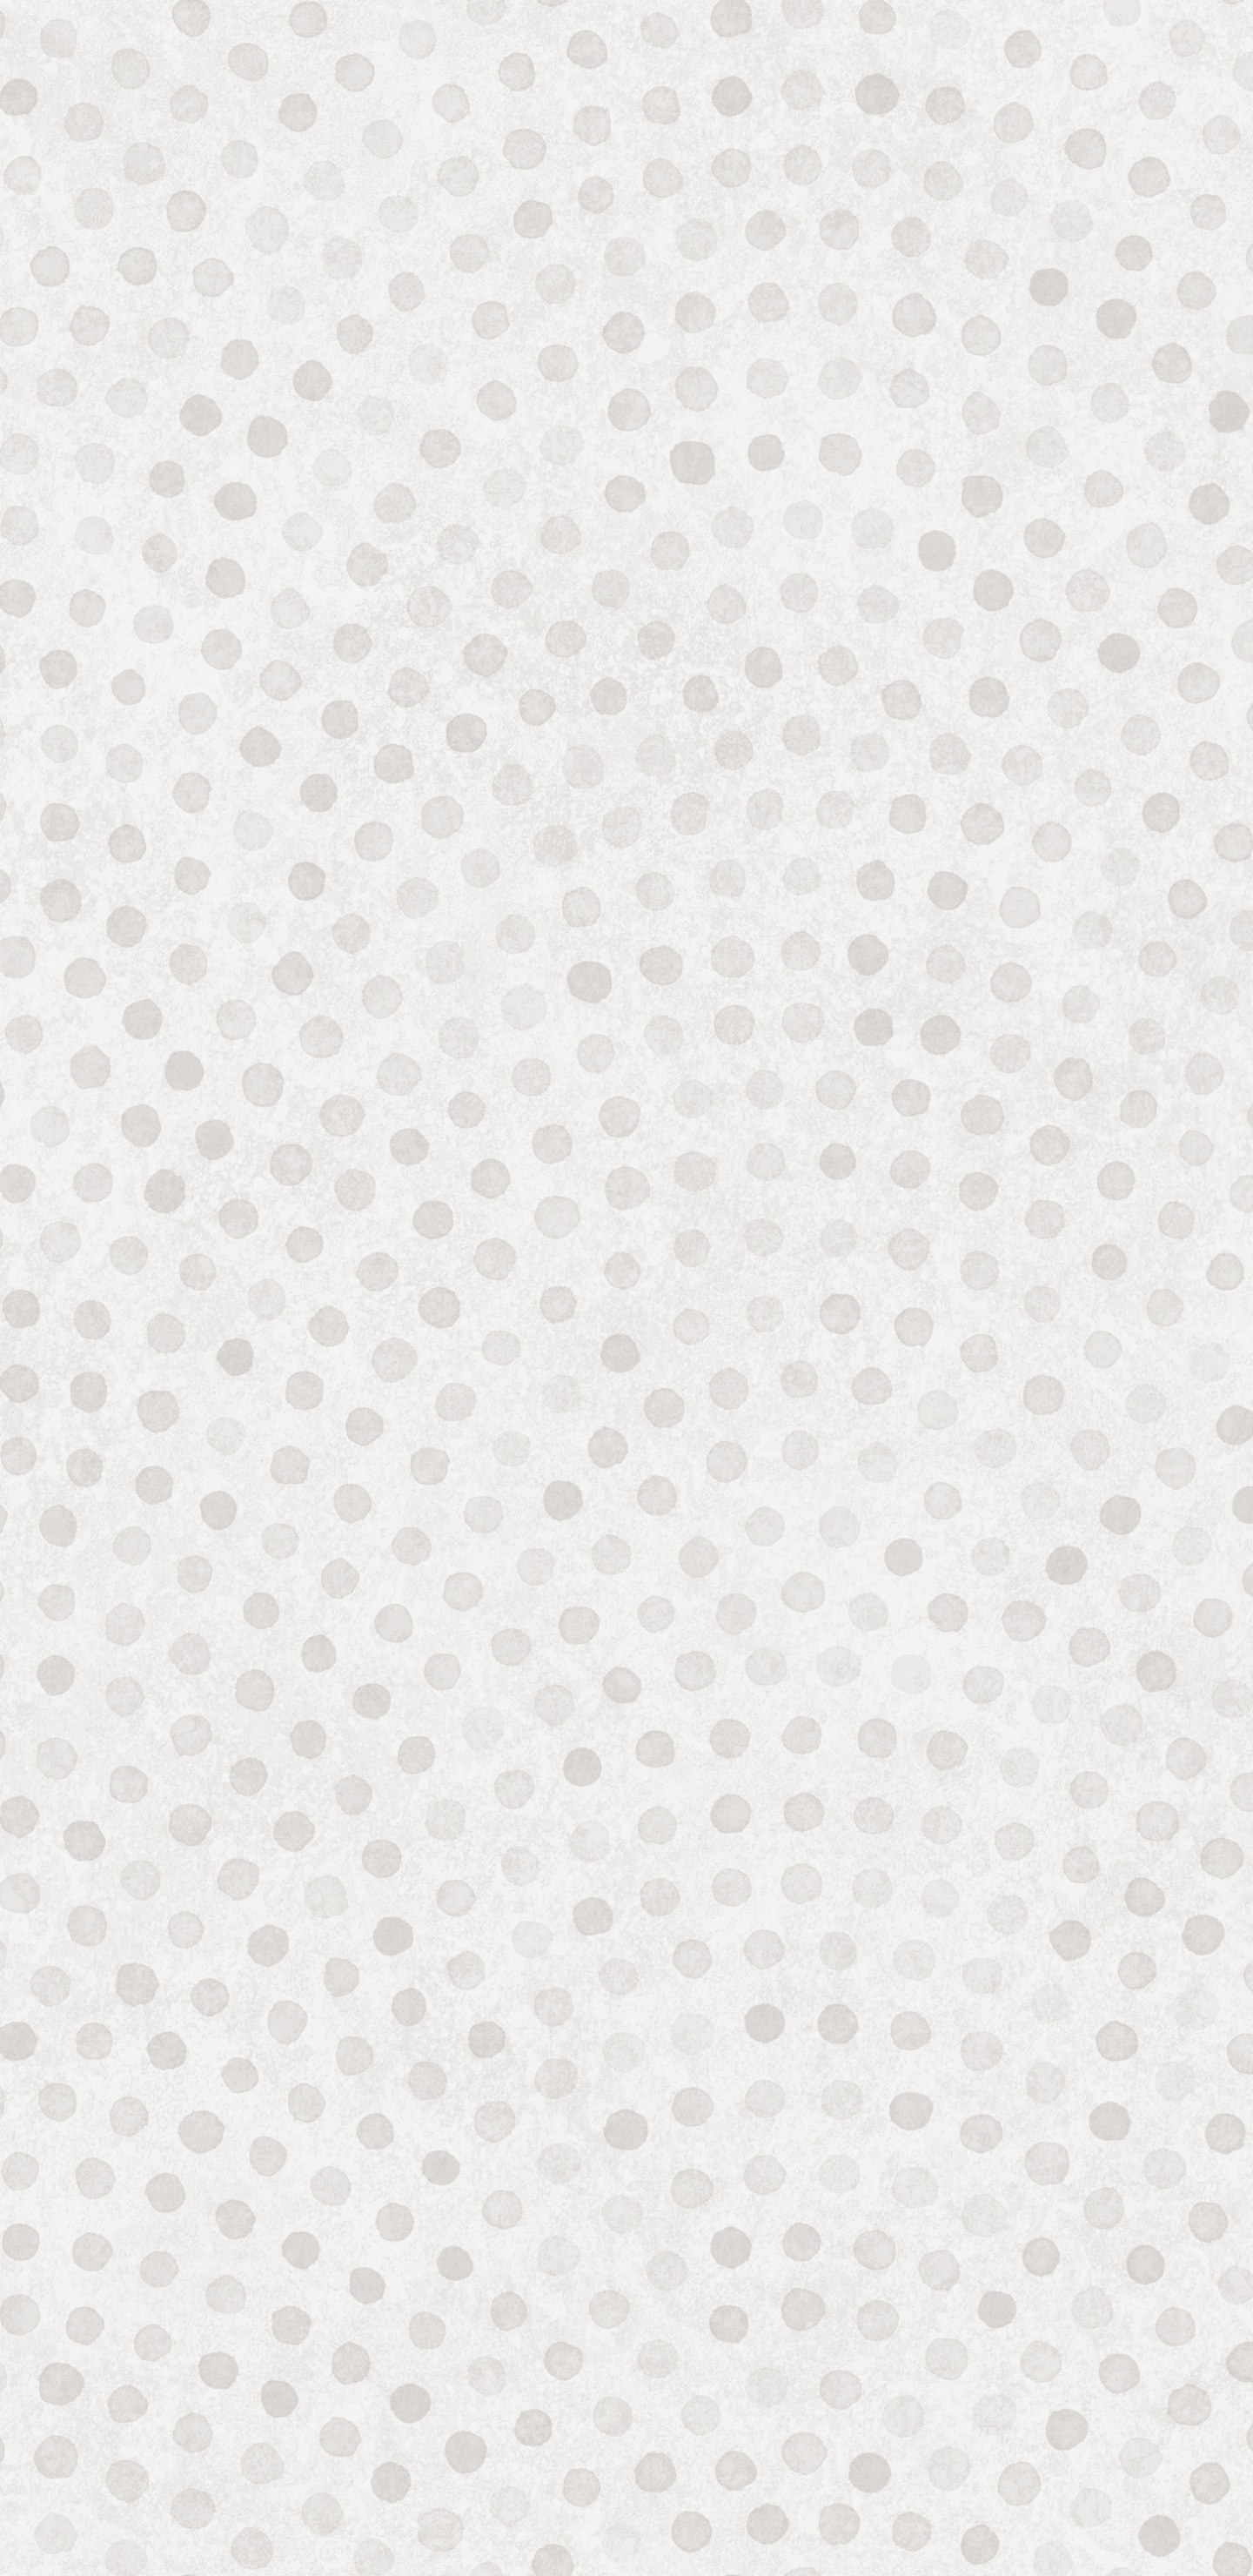 White and Black Polka Dot Textile. Wallpaper in 1440x2960 Resolution